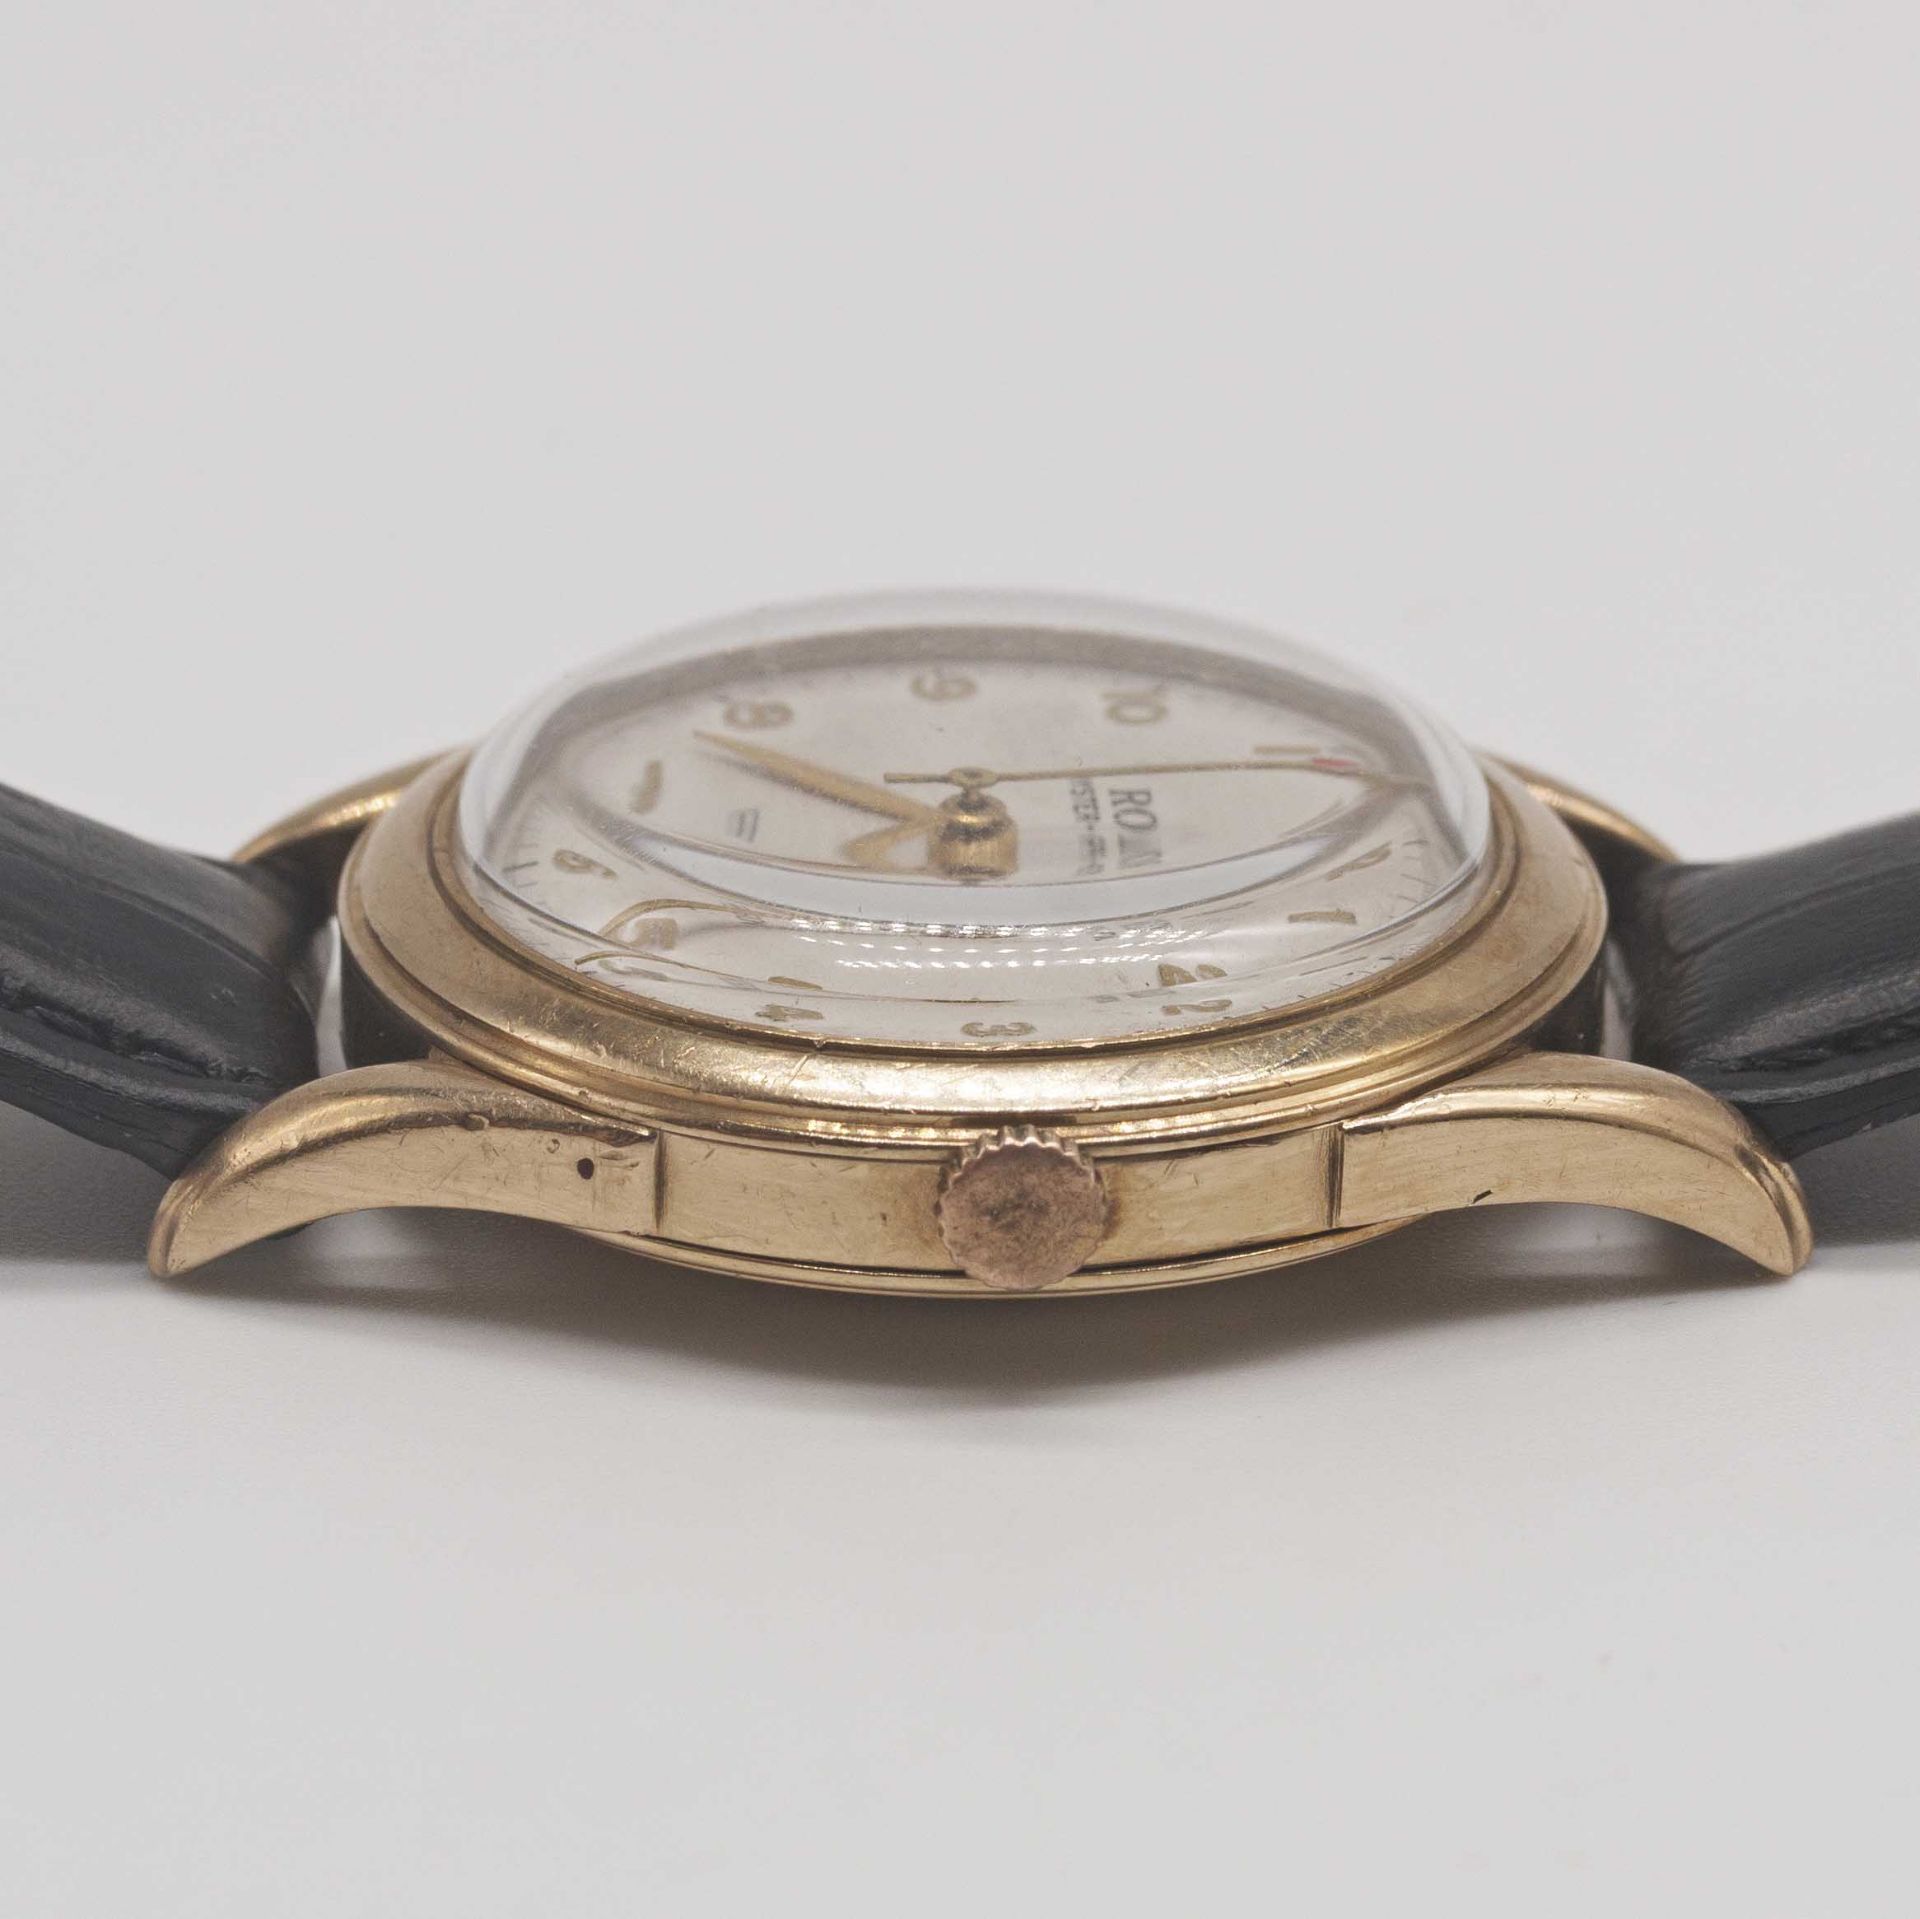 A GENTLEMAN'S 9CT SOLID GOLD ROLEX OYSTER PERPETUAL WRIST WATCH CIRCA 1950s Movement: Automatic " - Image 9 of 10